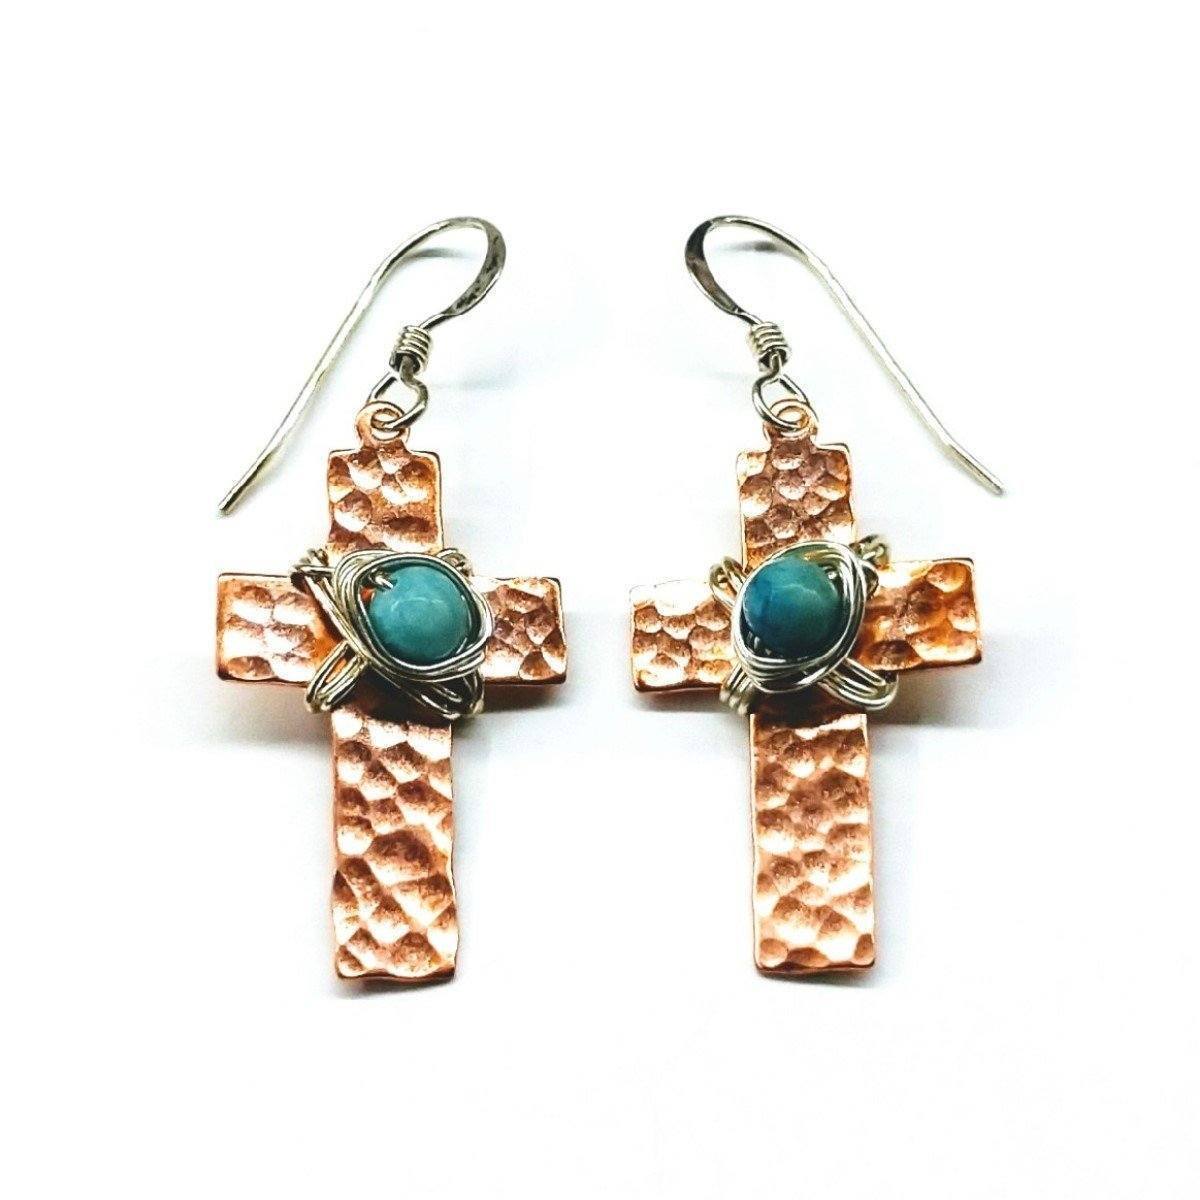 Handcrafted Copper Cross Earrings with Turquoise Beads - 1.5" Length - Earrings - Bijou Her -  -  - 